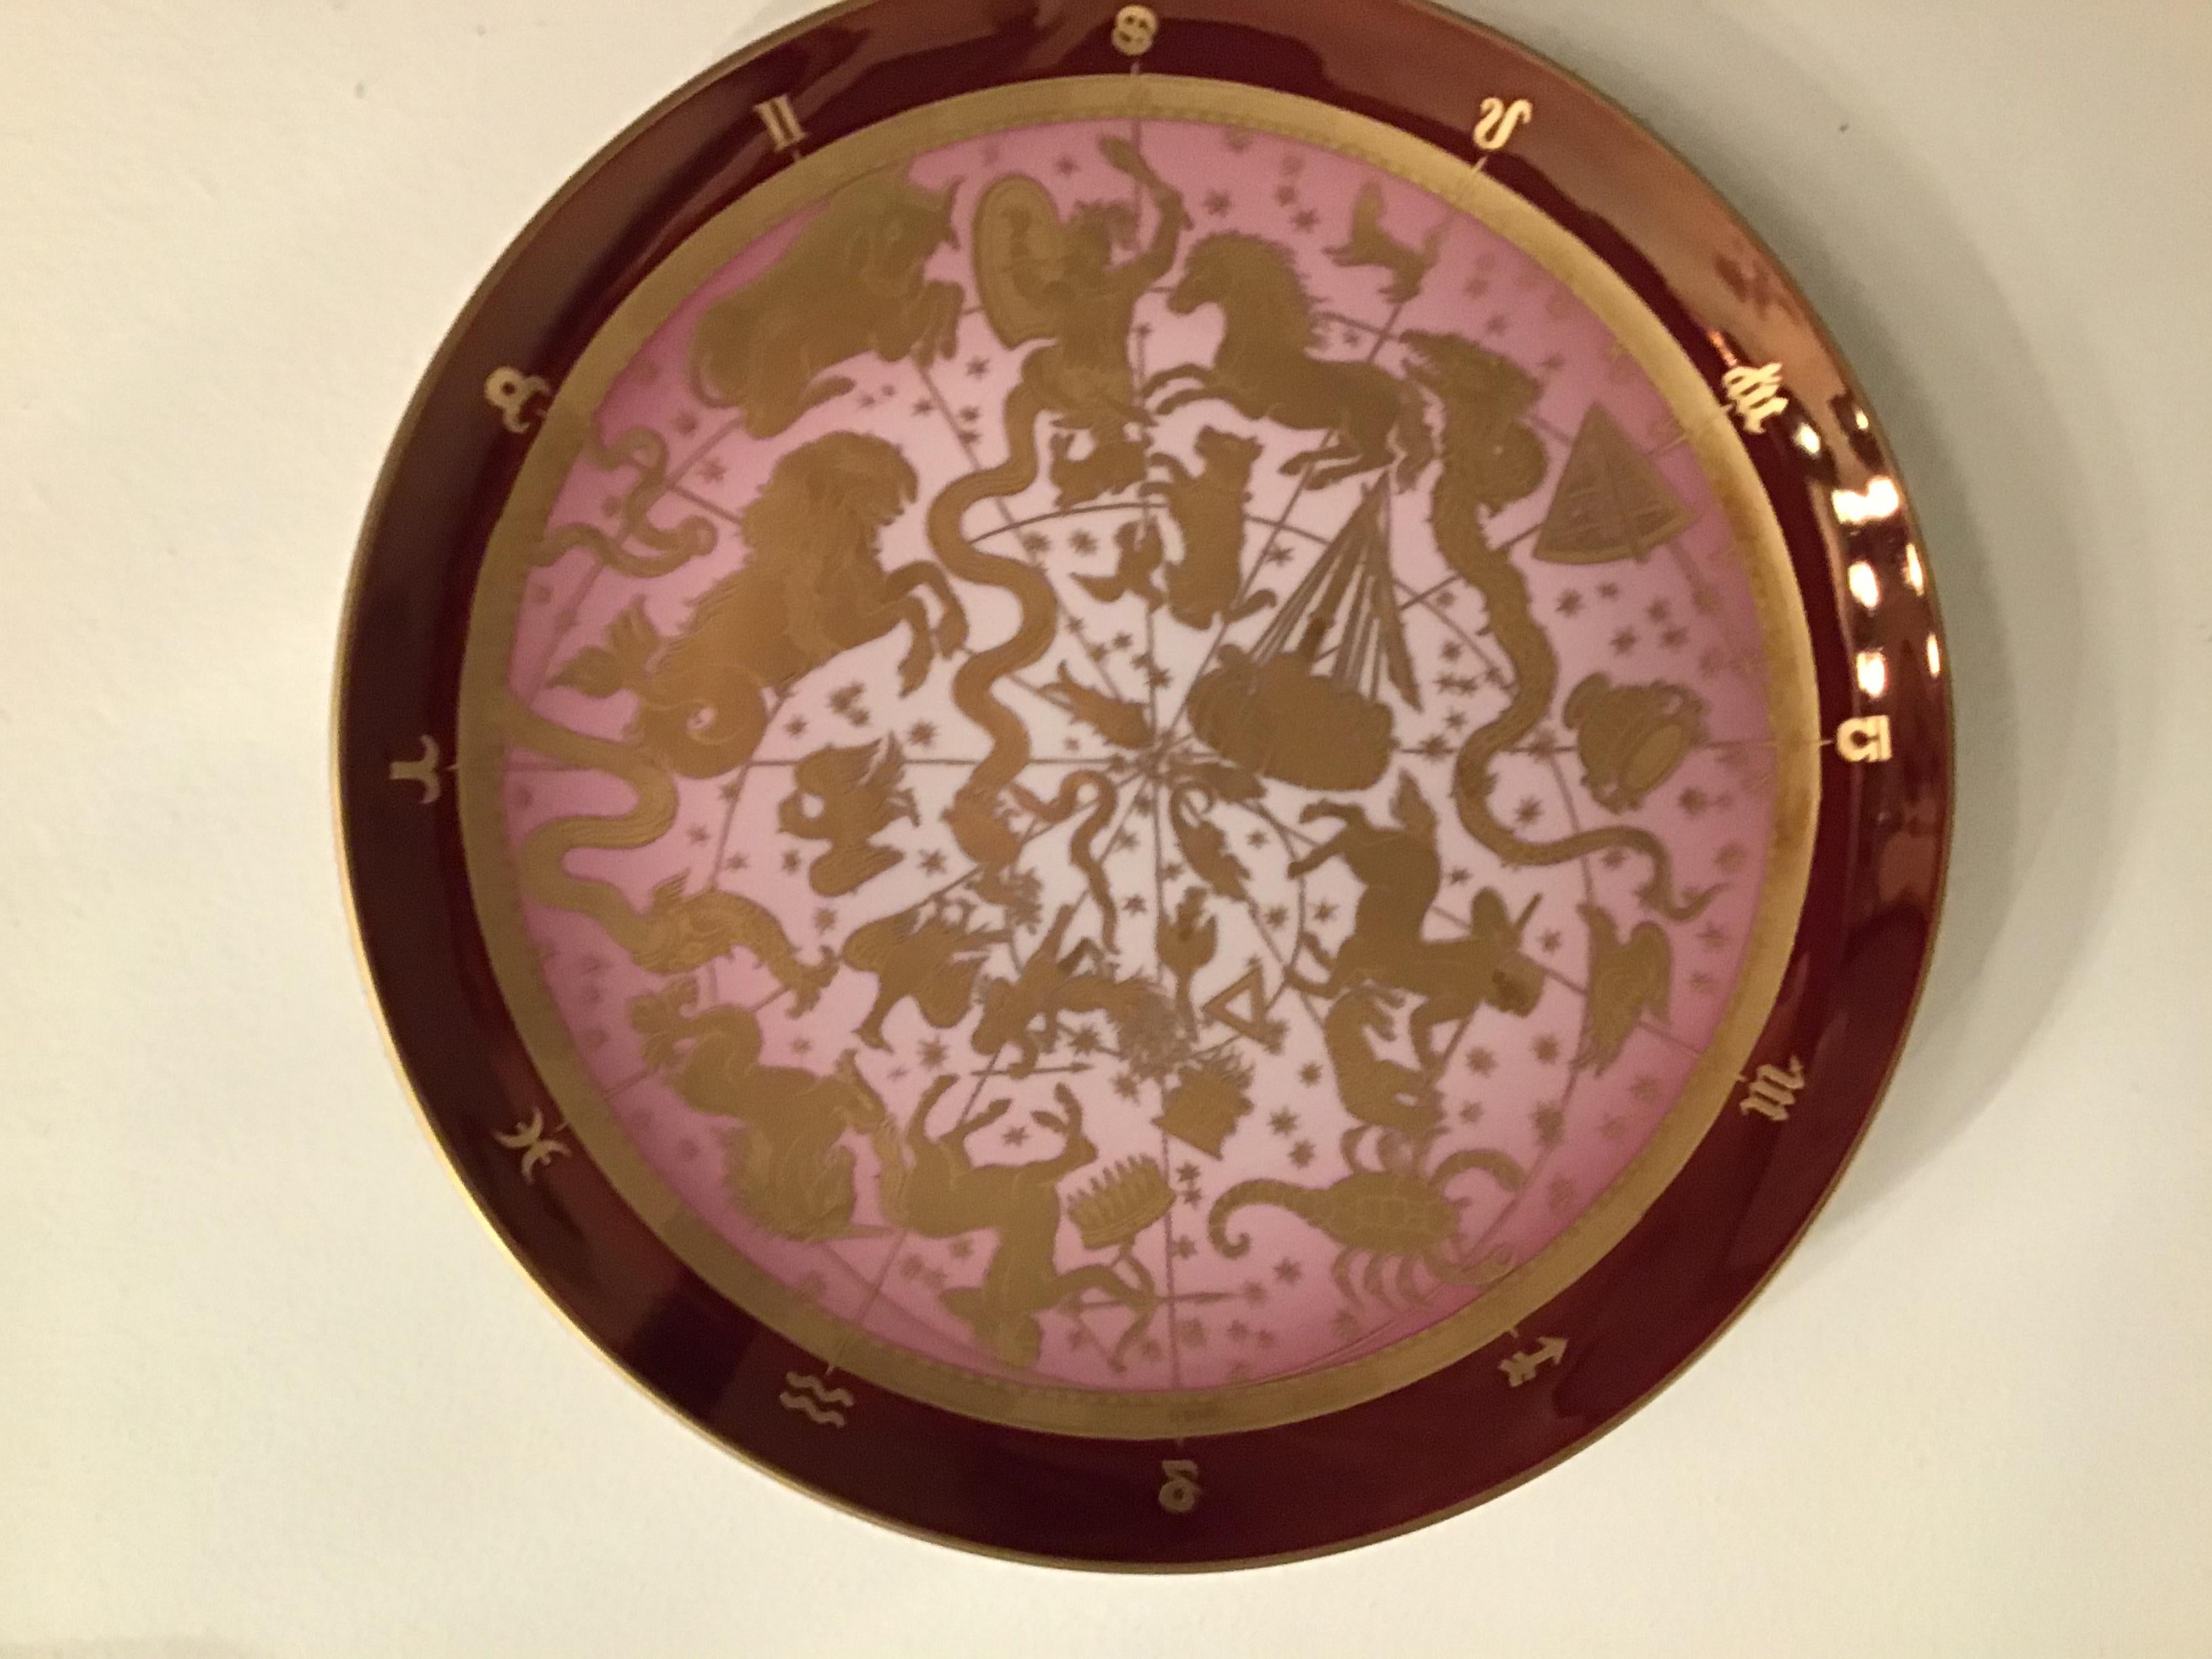 Morbelli Porcelain Wall Plate “Planisfero Celeste“ Worked with Pure Gold 1960 IT For Sale 8